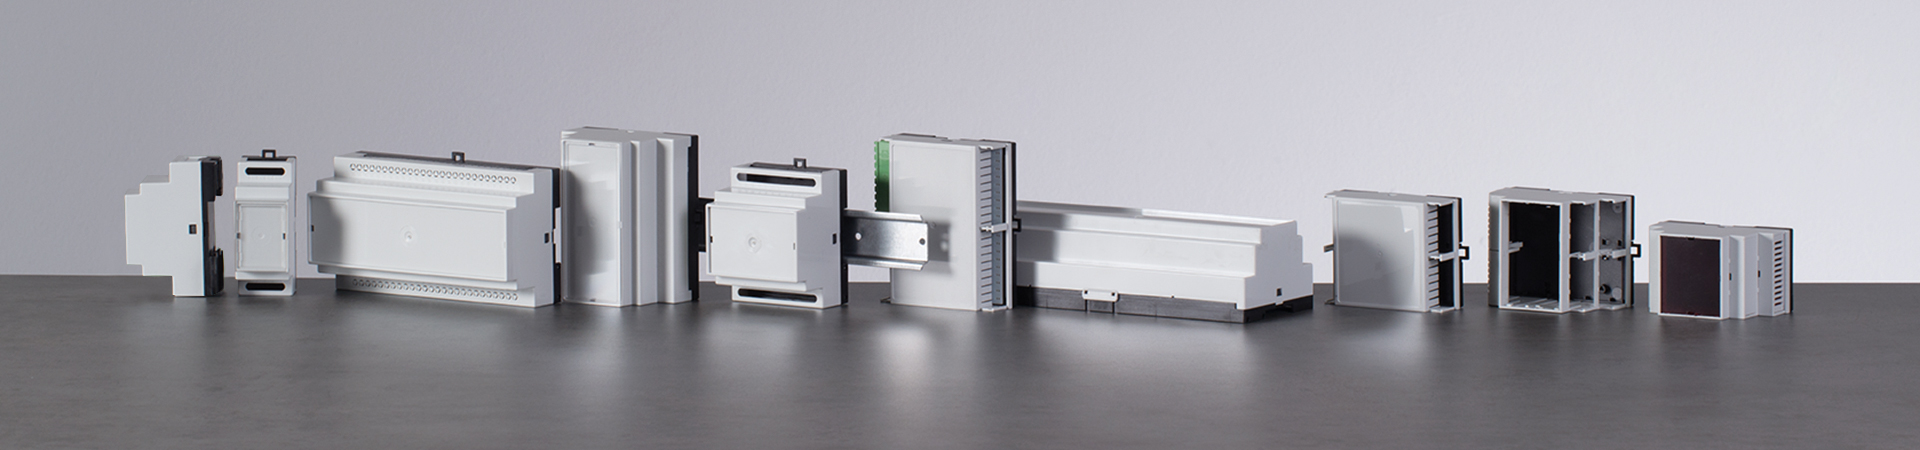 How to specify DIN rail enclosures?